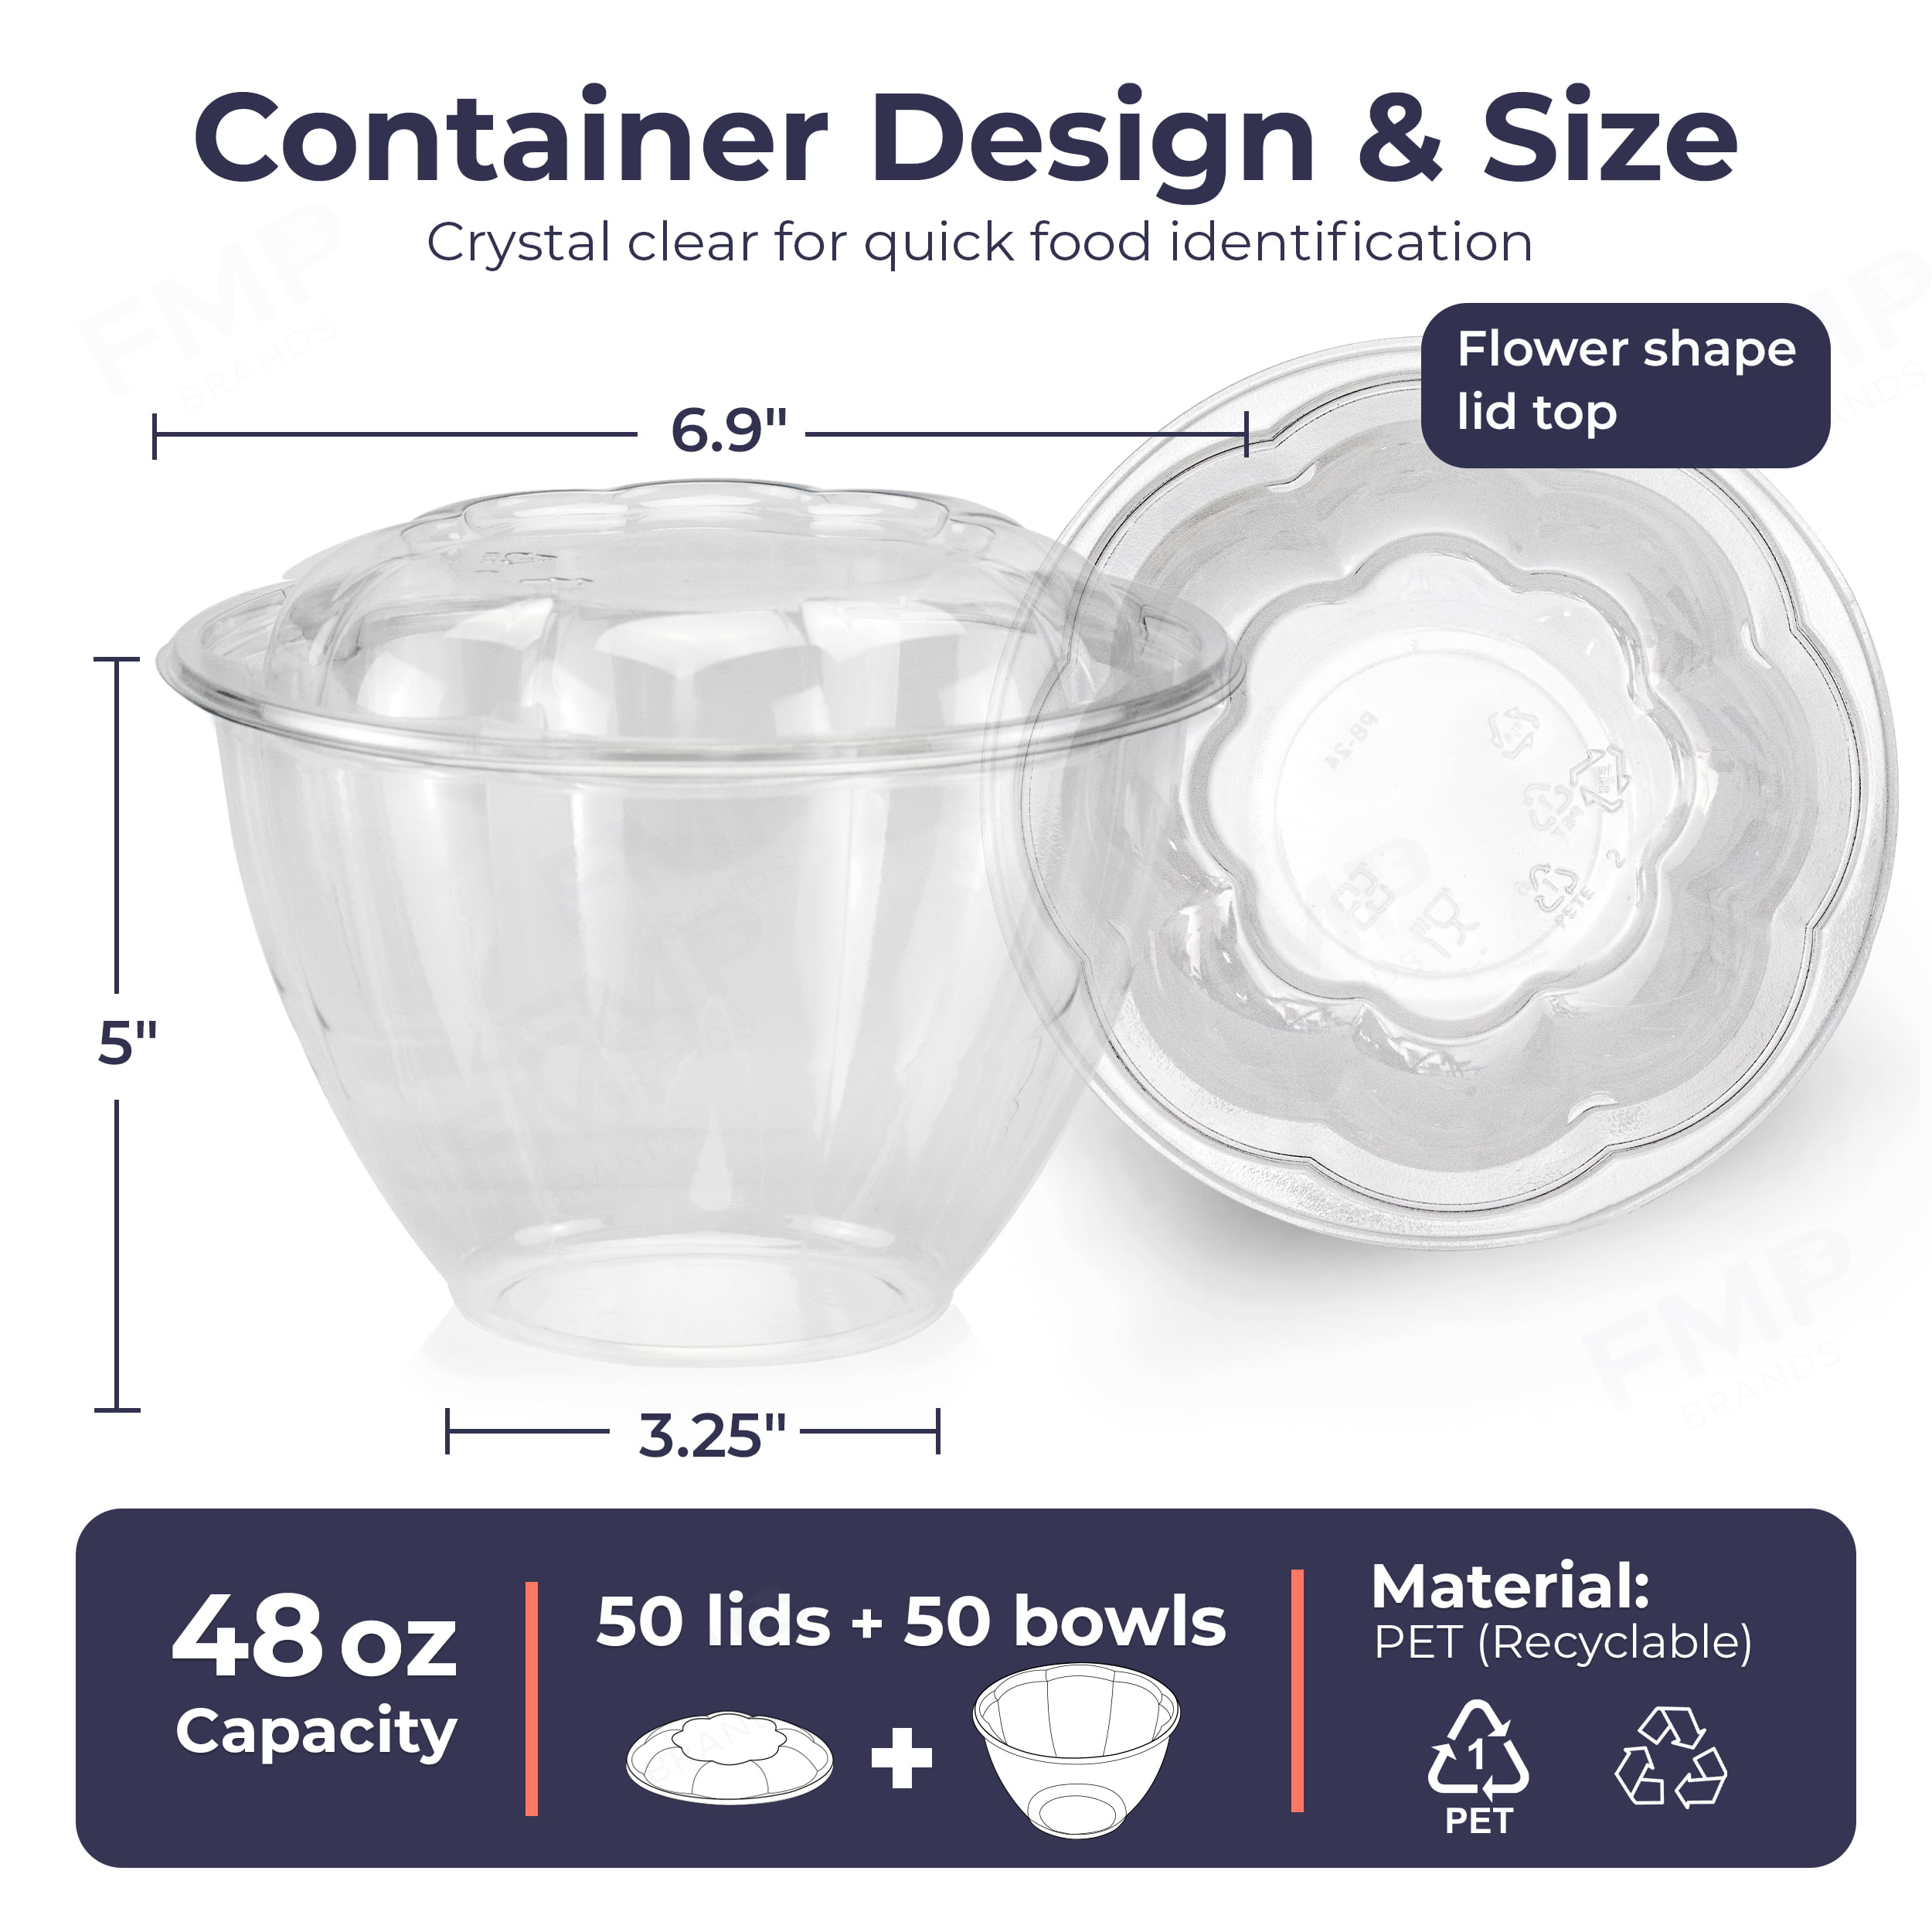 100 PACK] 48oz Clear Disposable Salad Bowls with Lids - Clear Plastic  Disposable Salad Containers for Lunch To-Go, Salads, Fruits, Airtight, Leak  Proof, Fresh, Meal Prep